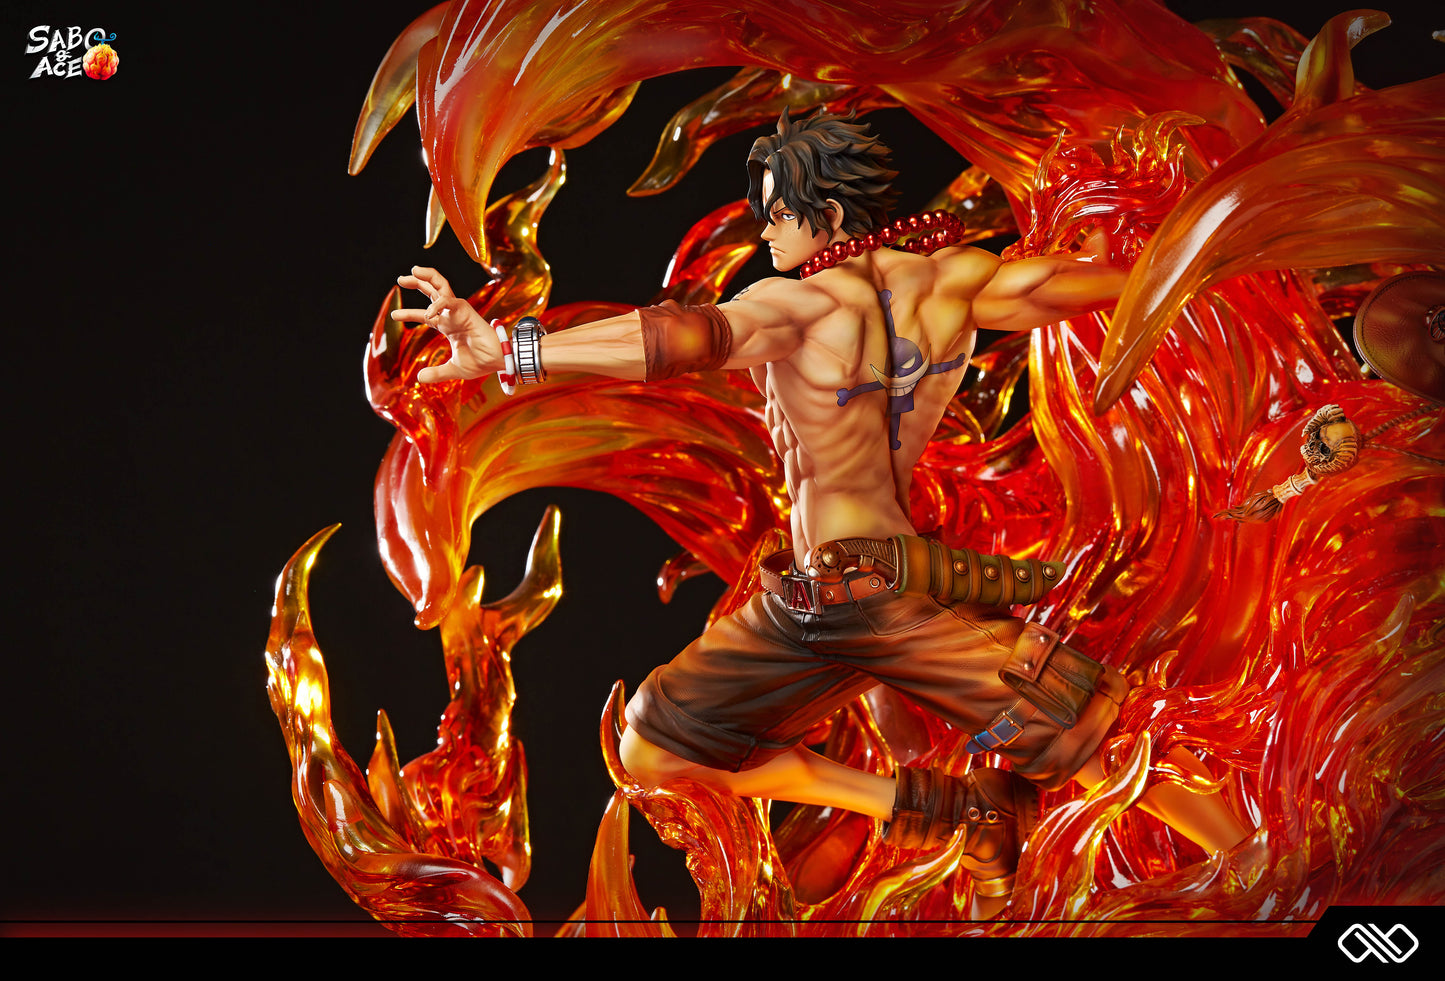 INFINITE STUDIO – ONE PIECE: ACE AND SABO [SOLD OUT]